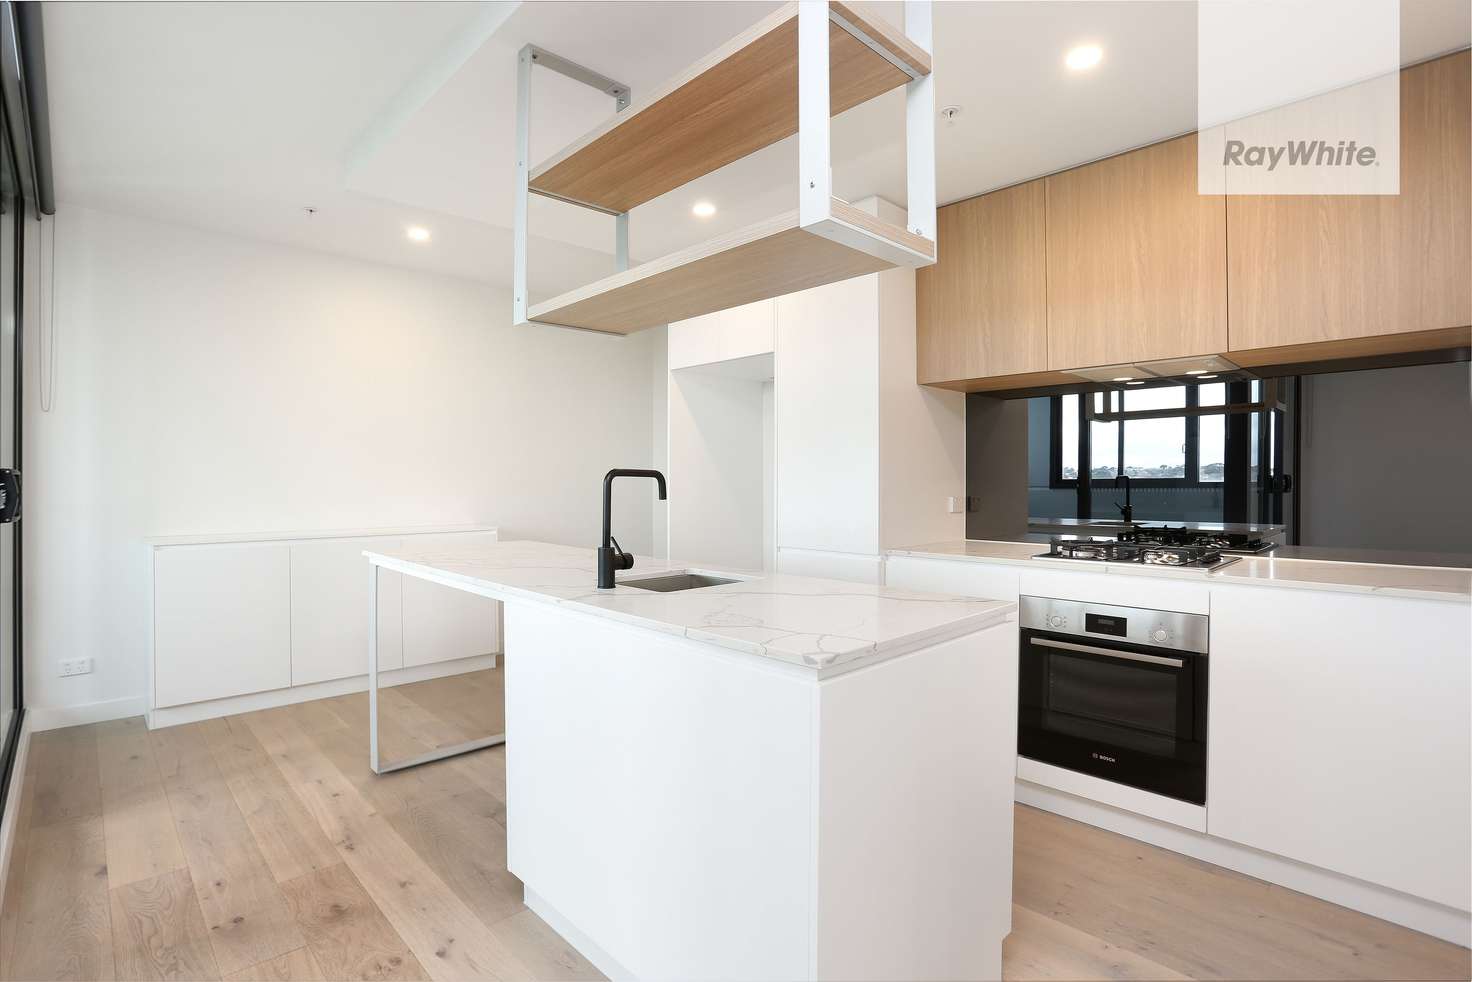 Main view of Homely apartment listing, 510/1-5 Olive York Way, Brunswick West VIC 3055